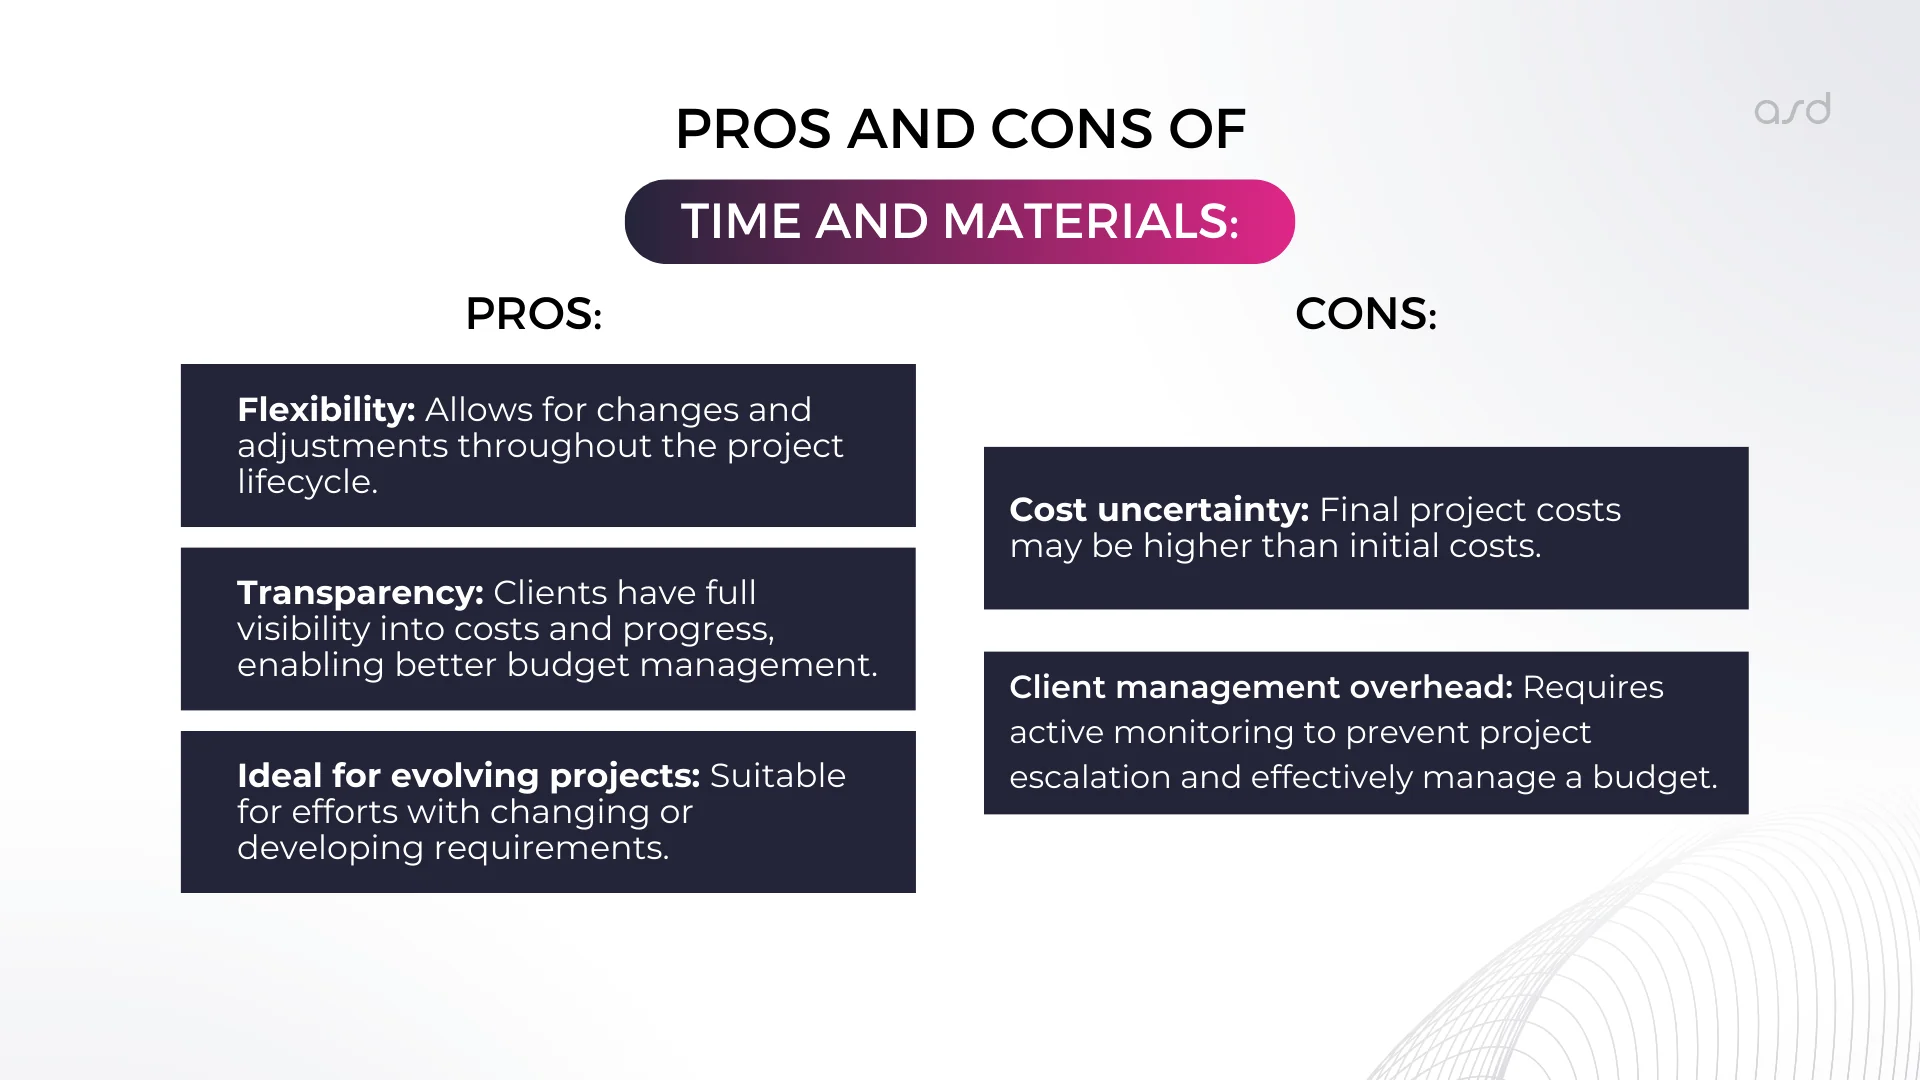 Pros and cons of Time and Materials 